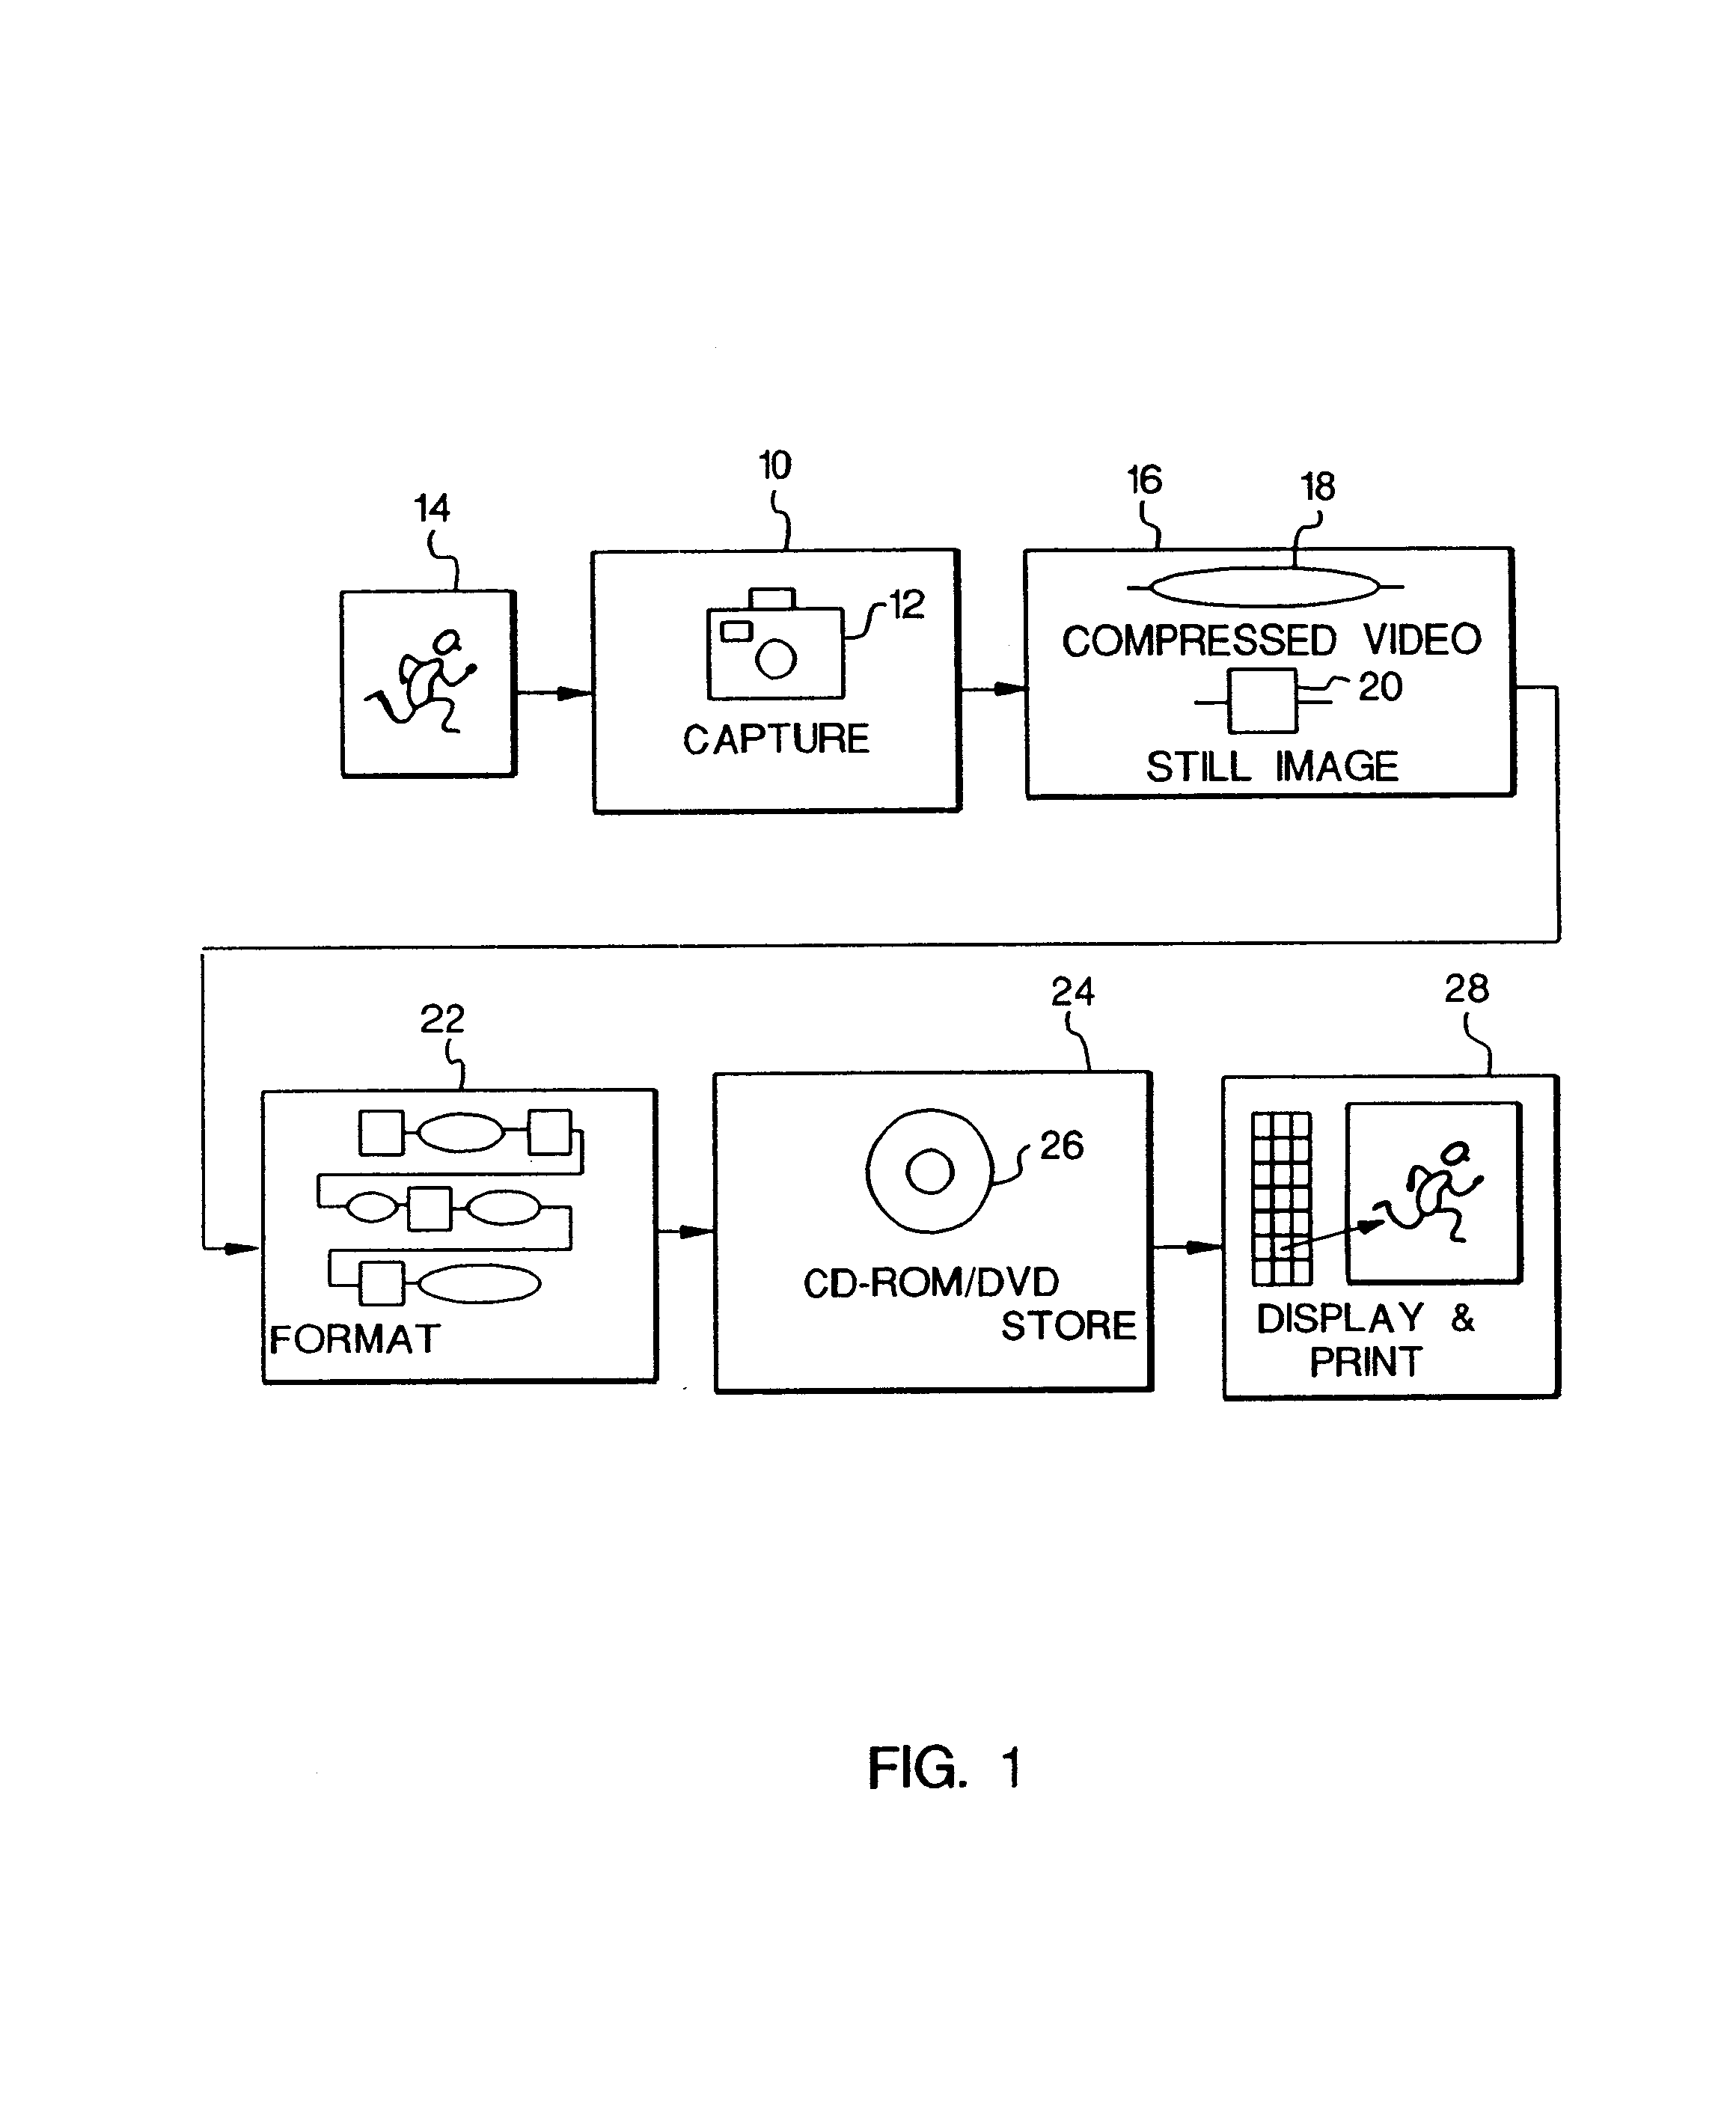 Digital camera for capturing a sequence of full and reduced resolution digital images and storing motion and still digital image data